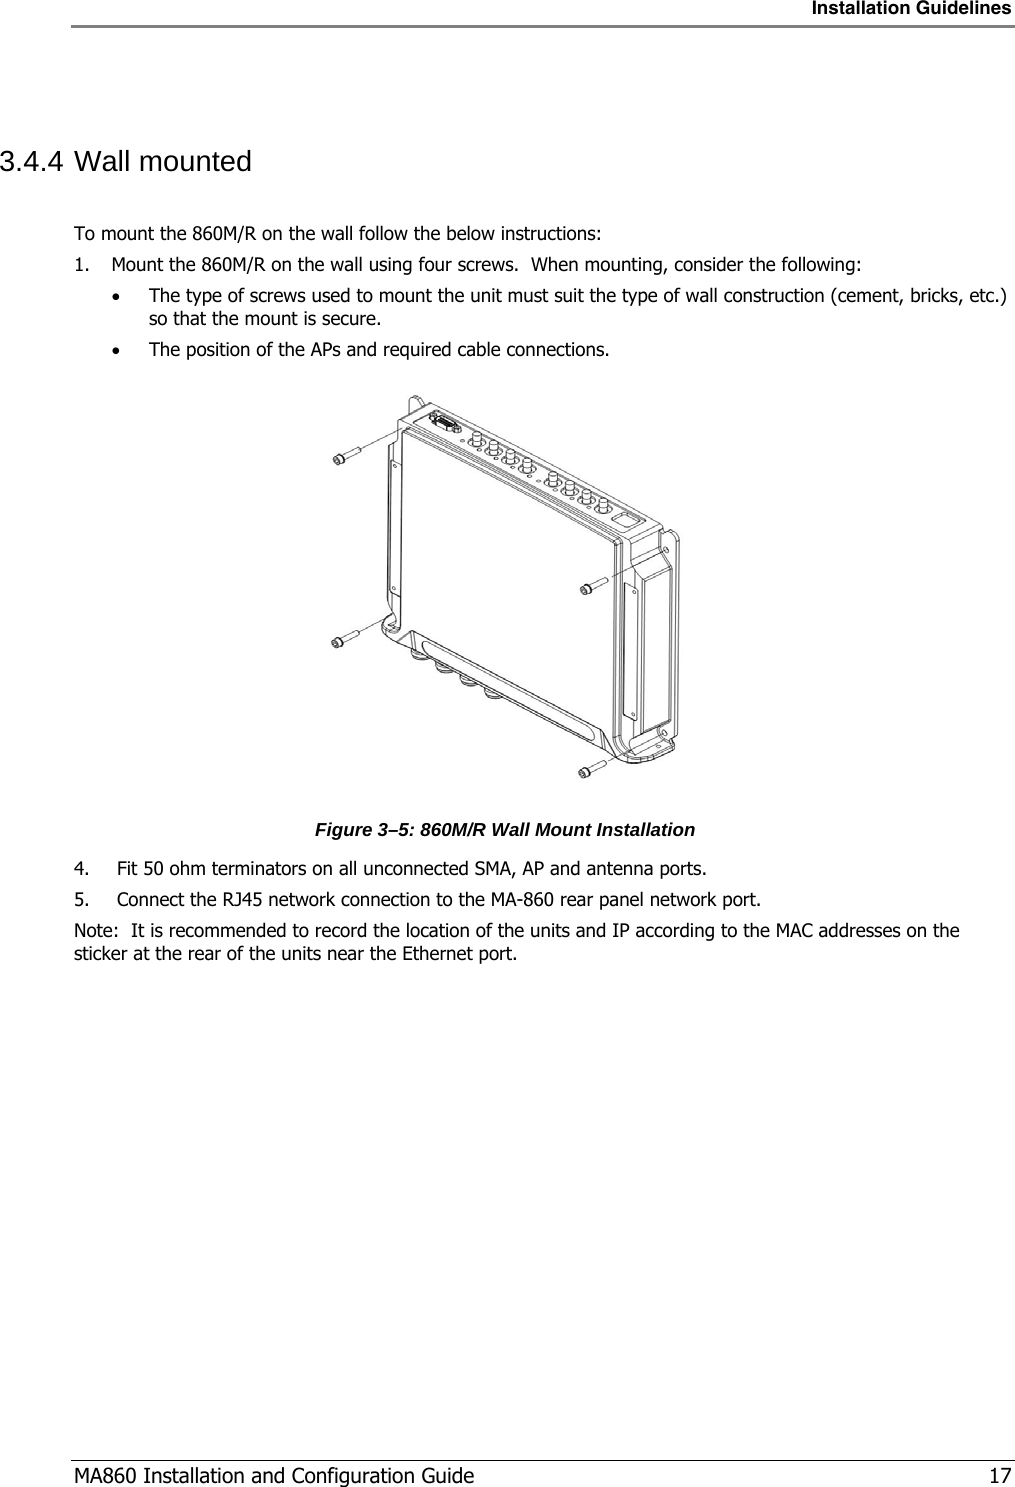 Installation Guidelines  MA860 Installation and Configuration Guide   17  3.4.4 Wall mounted   To mount the 860M/R on the wall follow the below instructions: 1. Mount the 860M/R on the wall using four screws.  When mounting, consider the following: • The type of screws used to mount the unit must suit the type of wall construction (cement, bricks, etc.) so that the mount is secure. • The position of the APs and required cable connections.  Figure  3–5: 860M/R Wall Mount Installation  4.  Fit 50 ohm terminators on all unconnected SMA, AP and antenna ports. 5.  Connect the RJ45 network connection to the MA-860 rear panel network port. Note:  It is recommended to record the location of the units and IP according to the MAC addresses on the sticker at the rear of the units near the Ethernet port. 